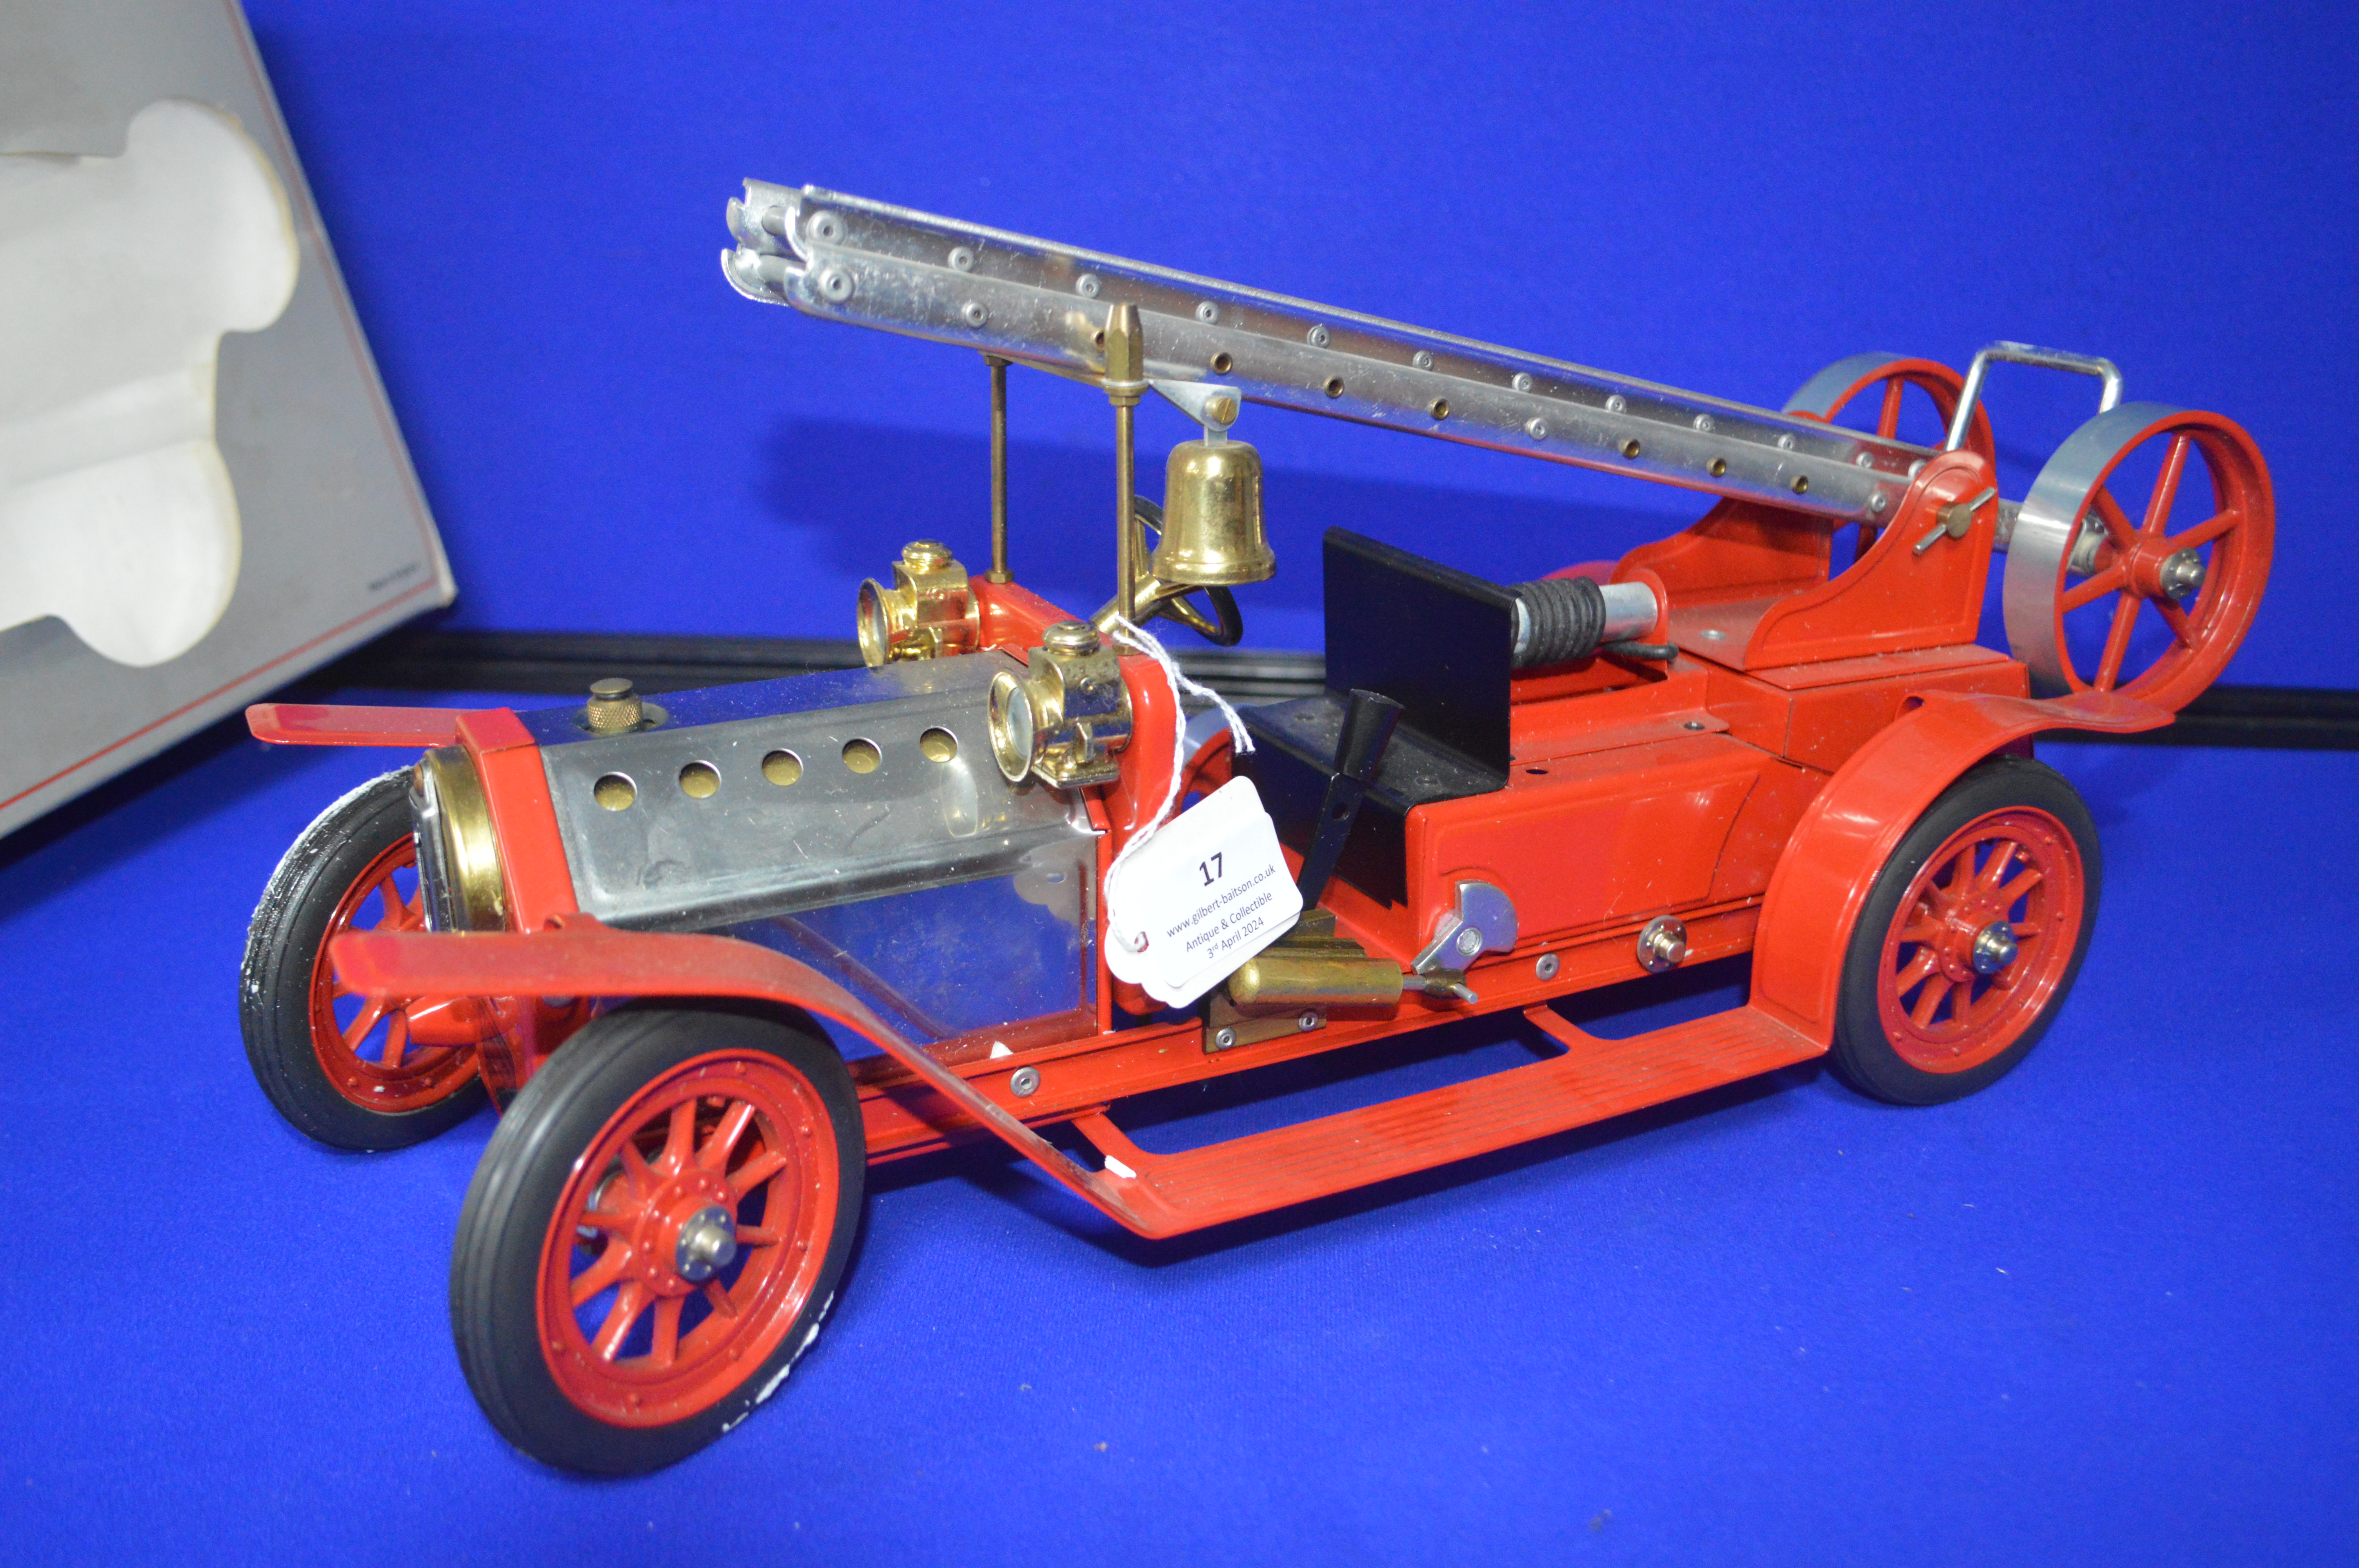 Mamod Live Steam Fire Engine with Packaging - Image 2 of 5